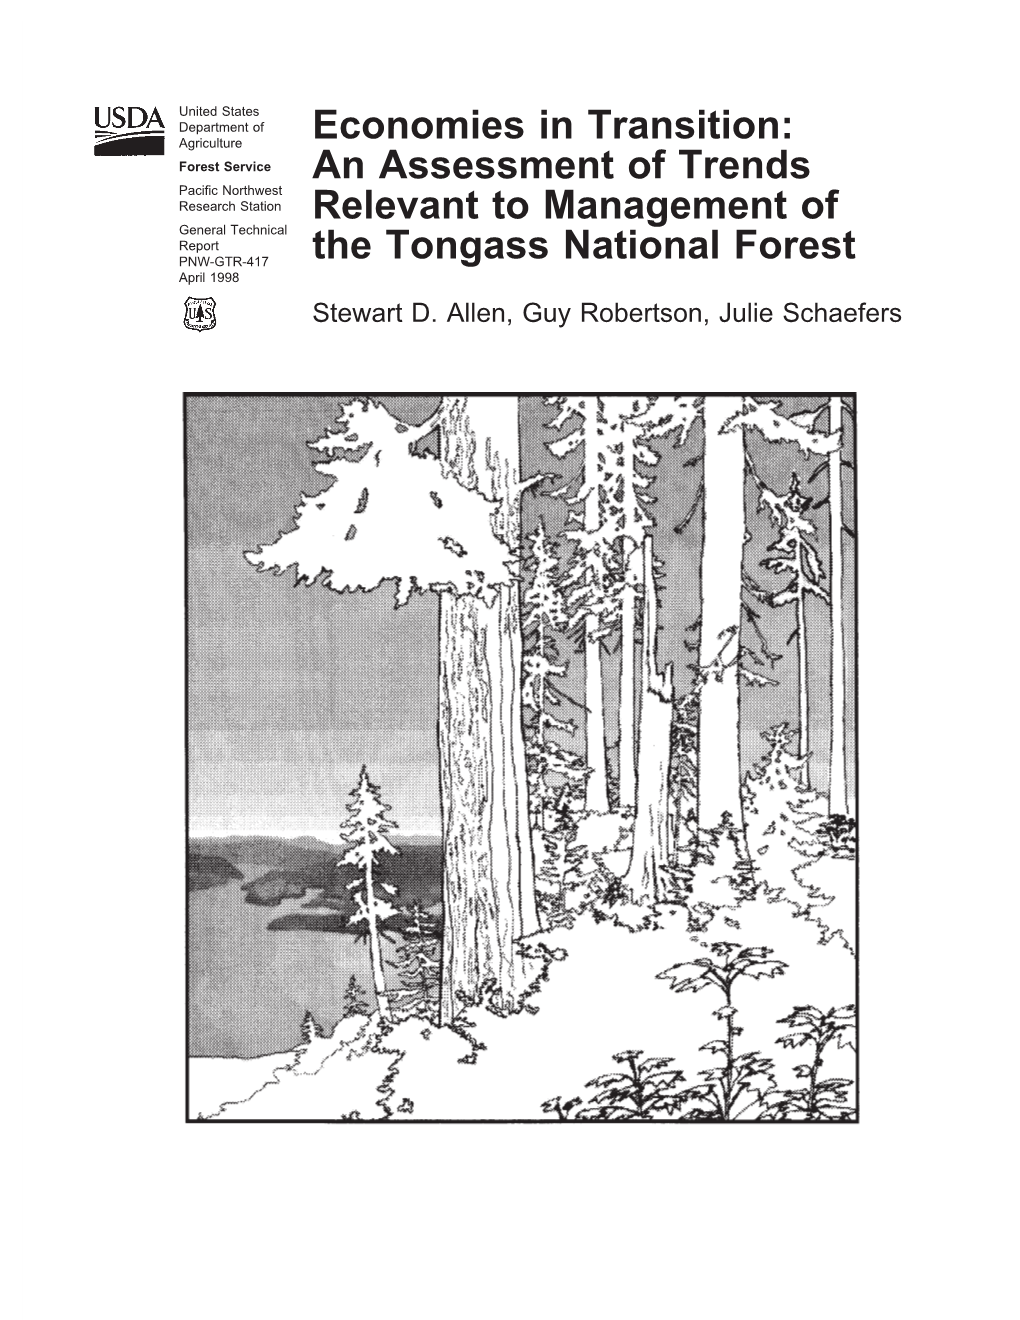 An Assessment of Trends Relevant to Management of the Tongass National Forest